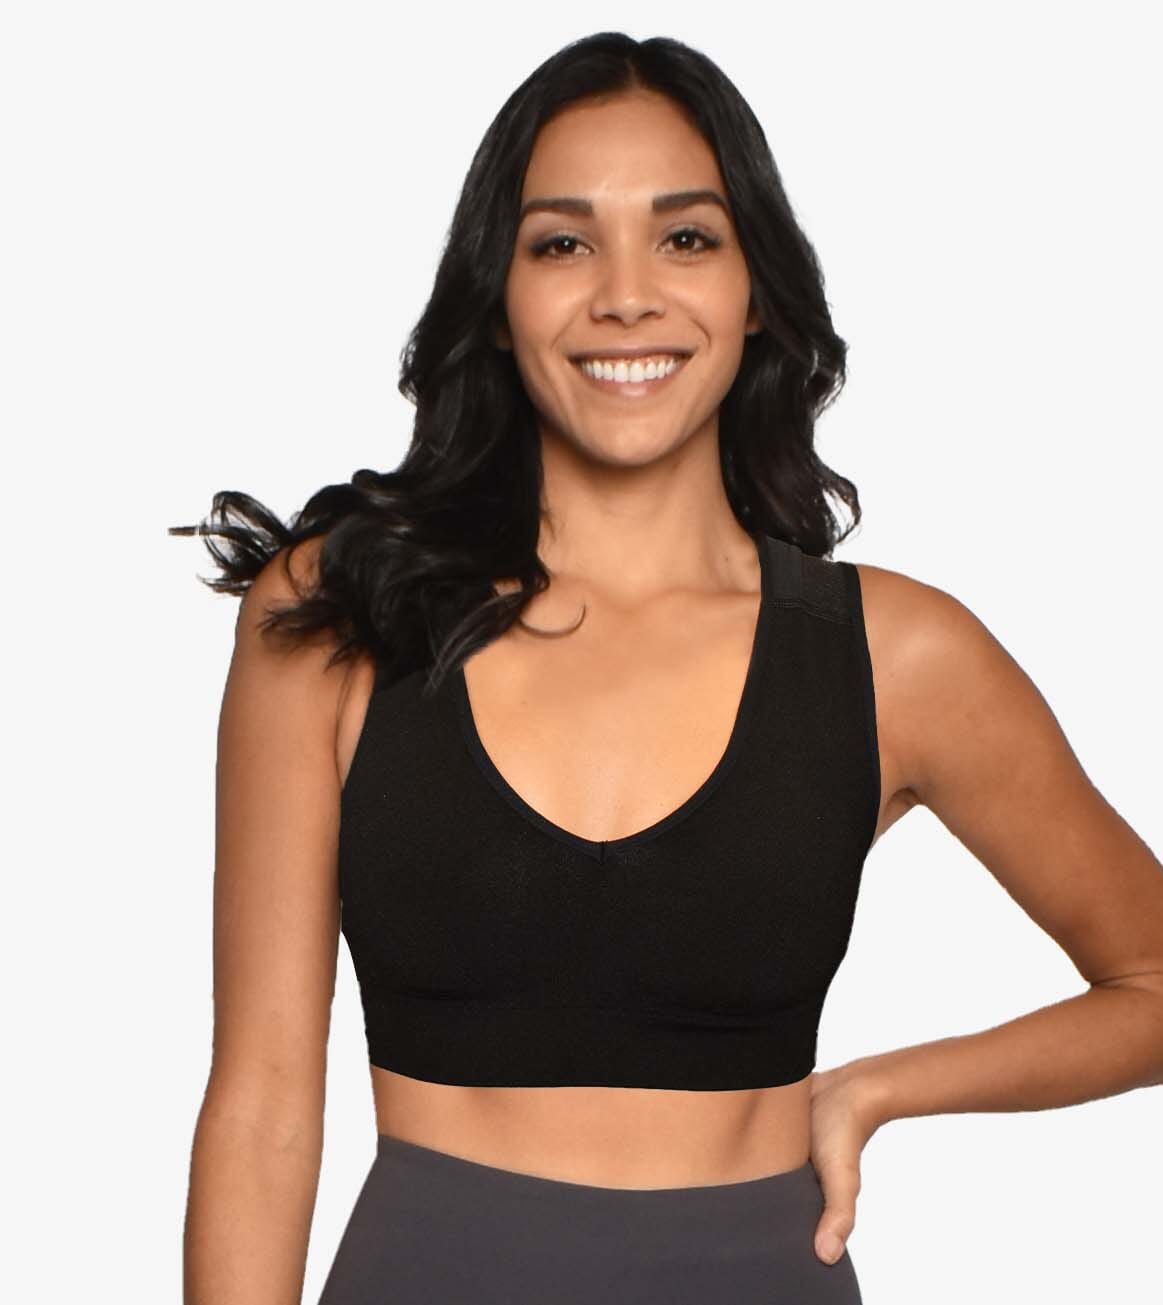 Wearing right sports bra increases women's running performance